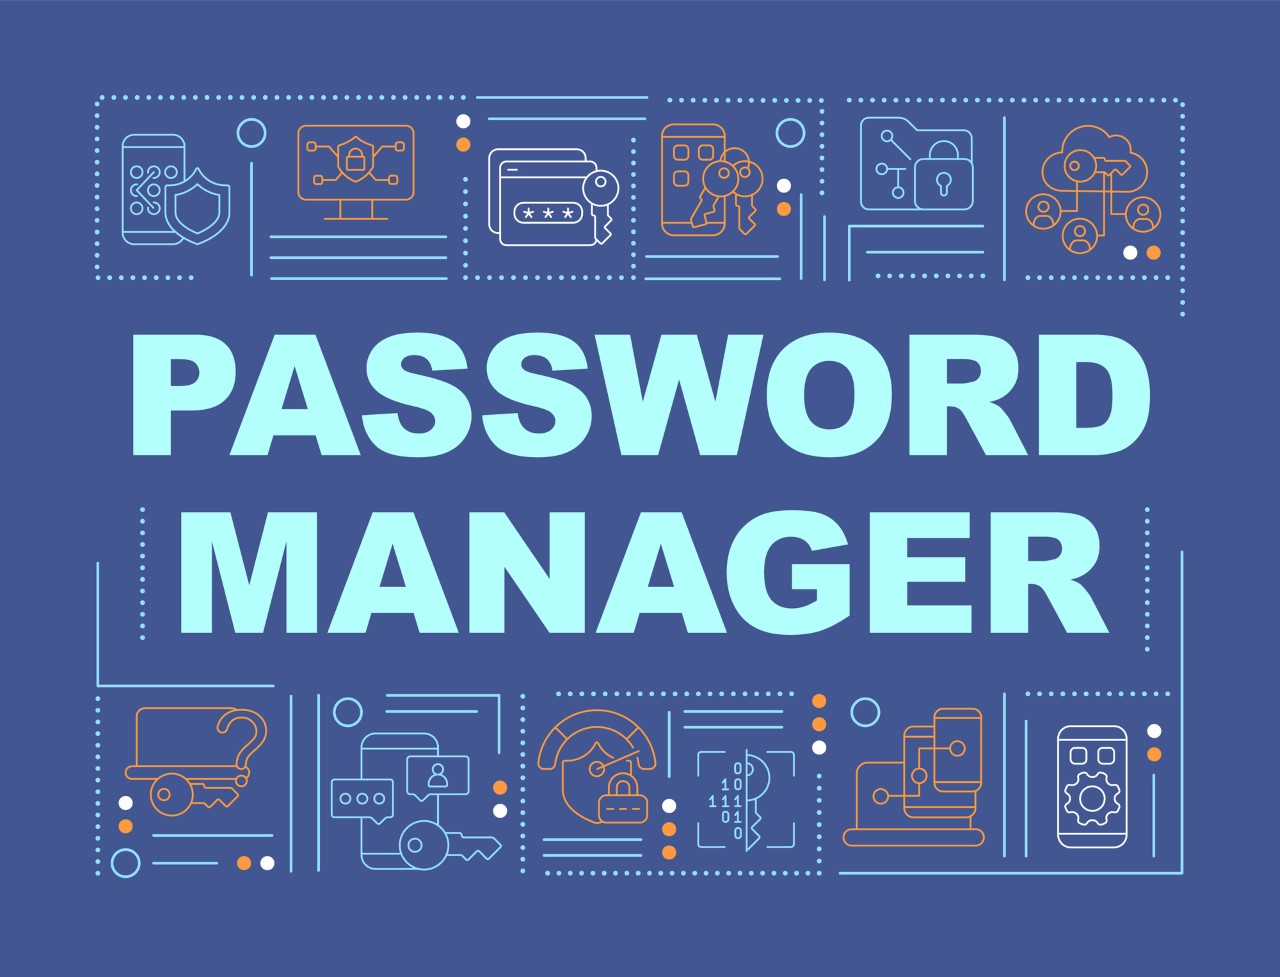 Blue graphic with the text "PASSWORD MANAGER"